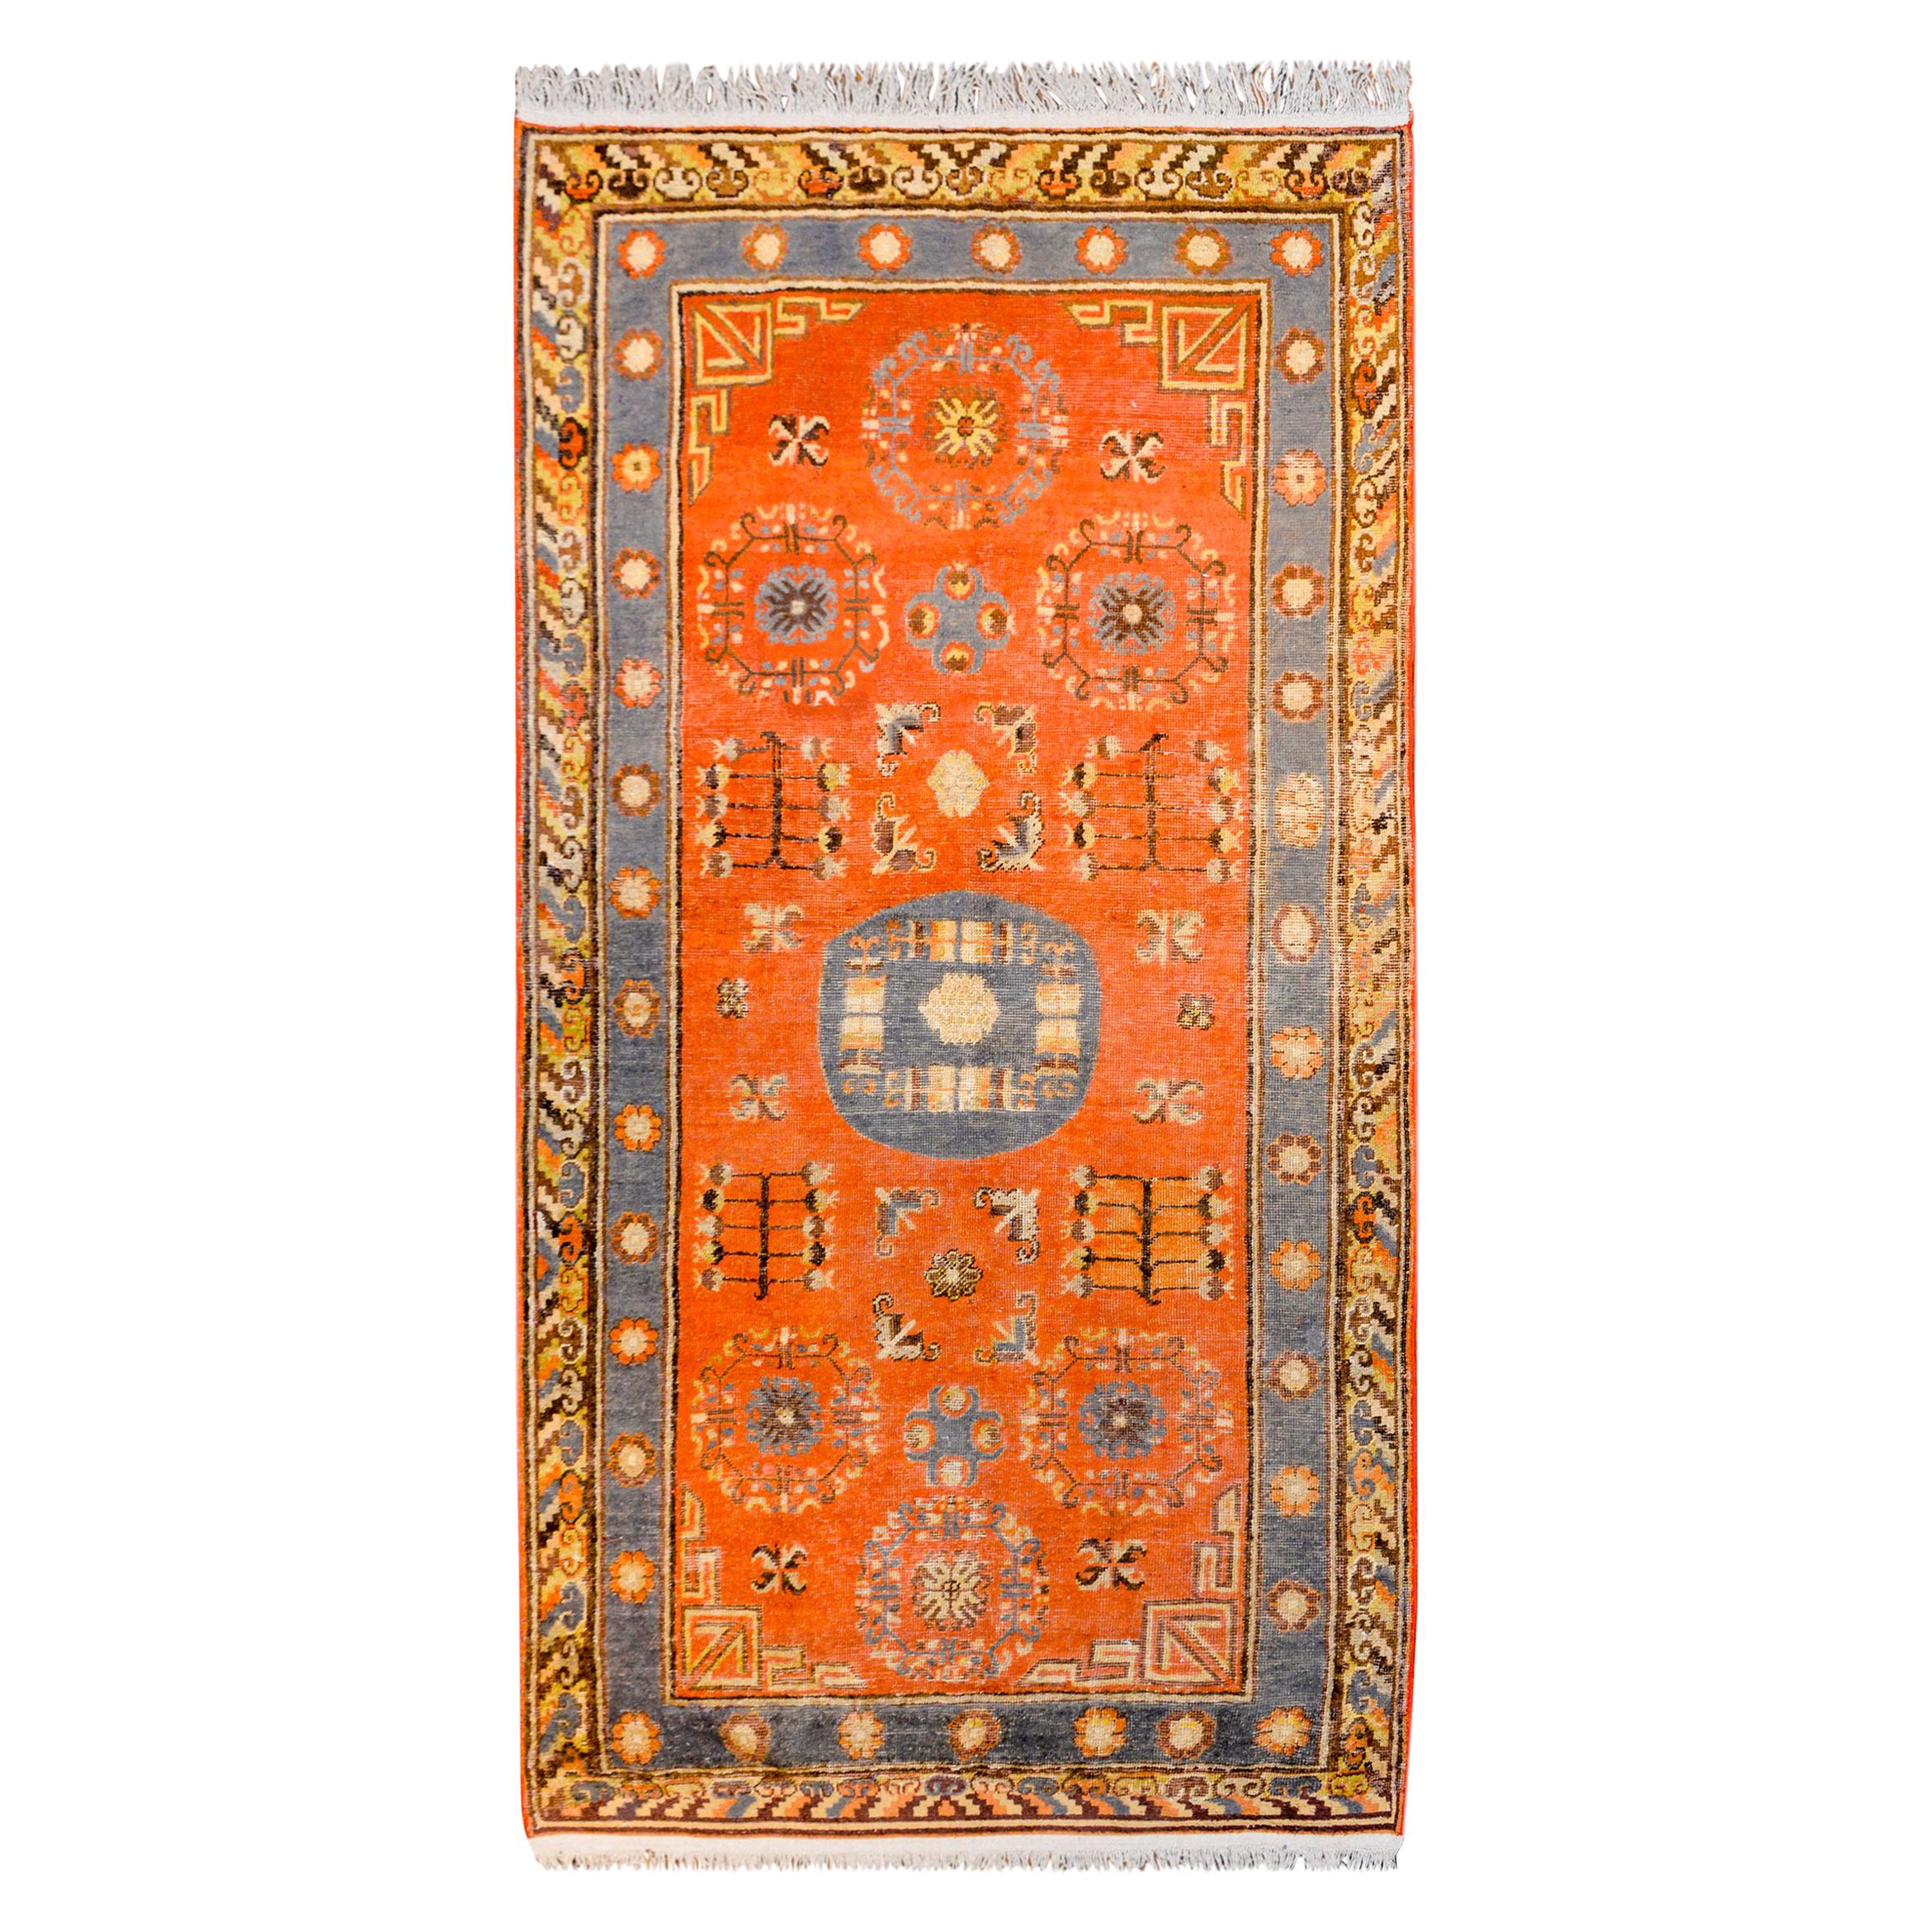 Early 20th Century Central Asian Khotan Rug For Sale